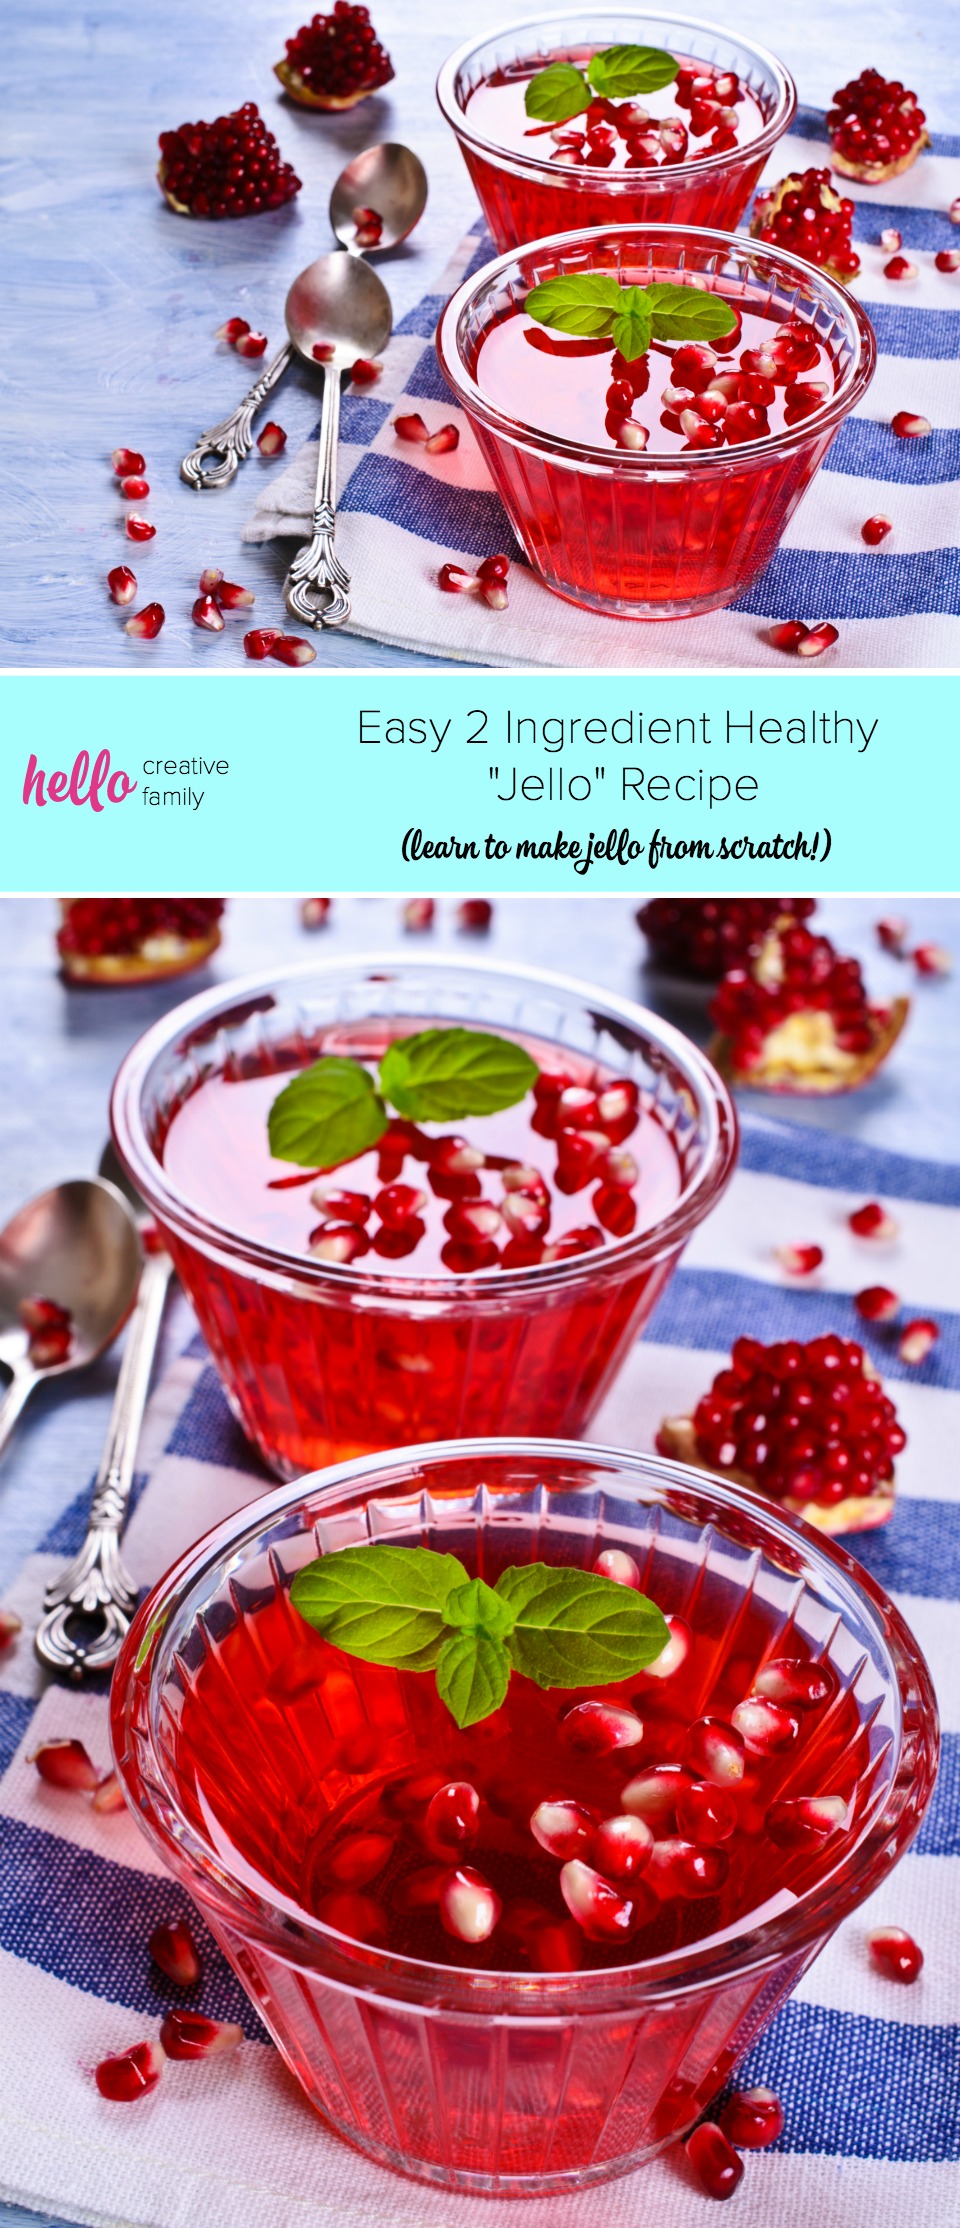 Making "jello" from scratch is easy! You need just two ingredients to make this healthy jello recipe. This homemade dessert idea is kid friendly and mom approved! Make strawberry jello, apple jello, pomegranate jello and more!  #dessert #realfood #homemade #realfood